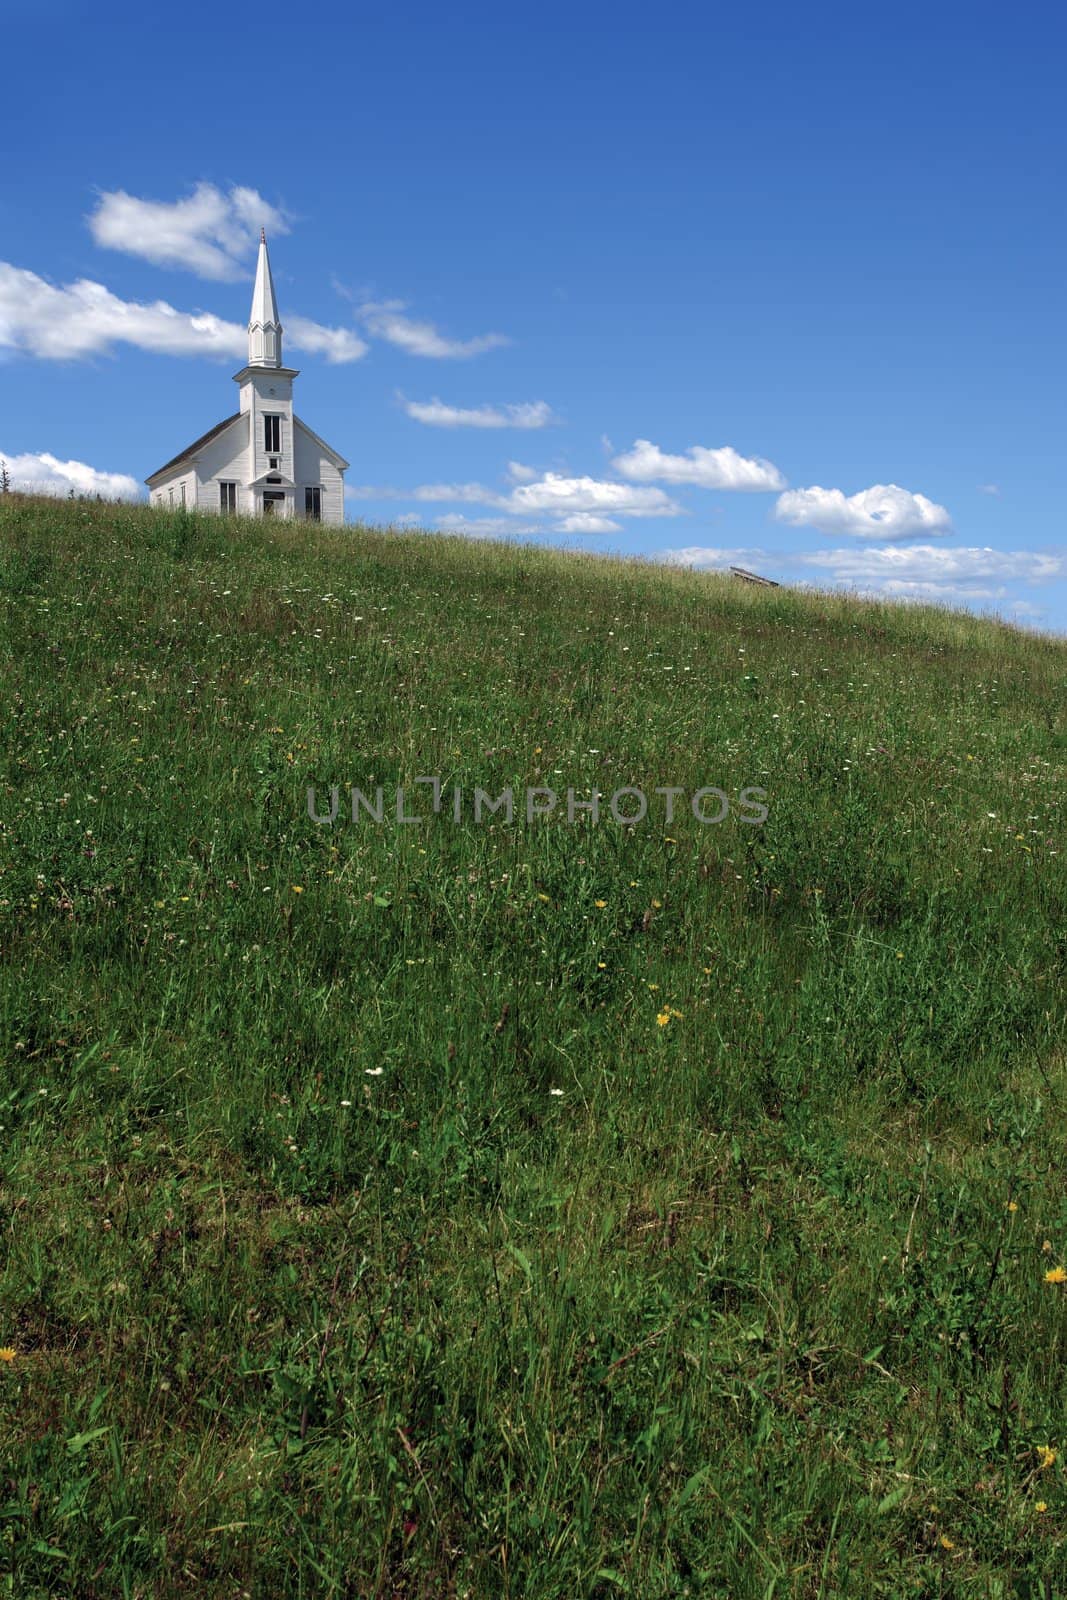 Photo of a little white wooden church on the top of a hill.